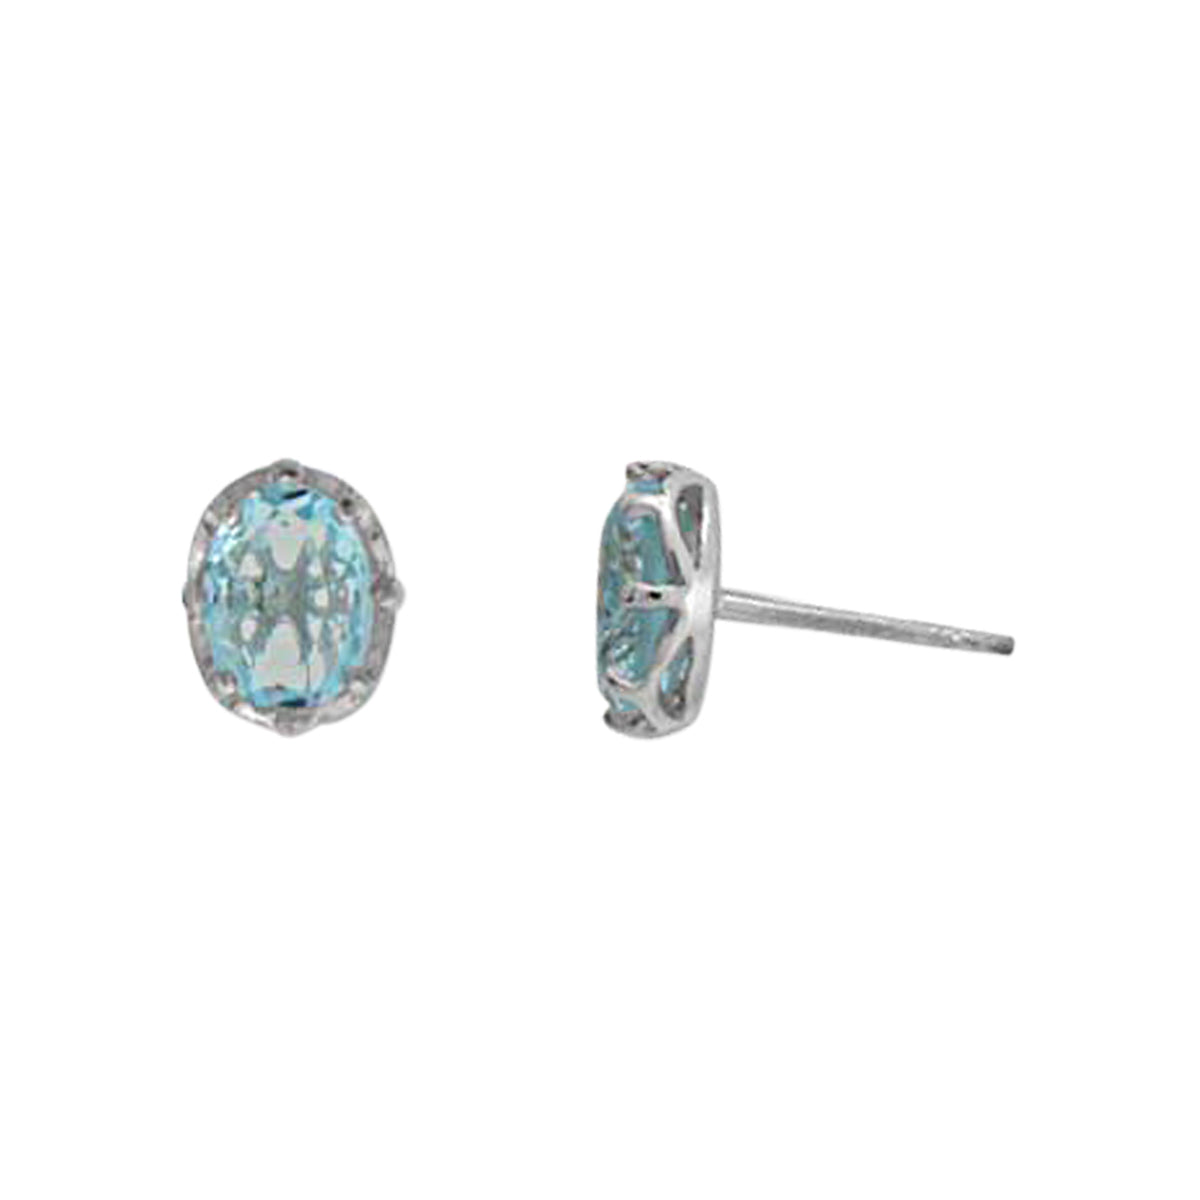 STERLING SILVER RHODIUM PROTECTED OVAL POST EARRINGS BLUE TOPAZ